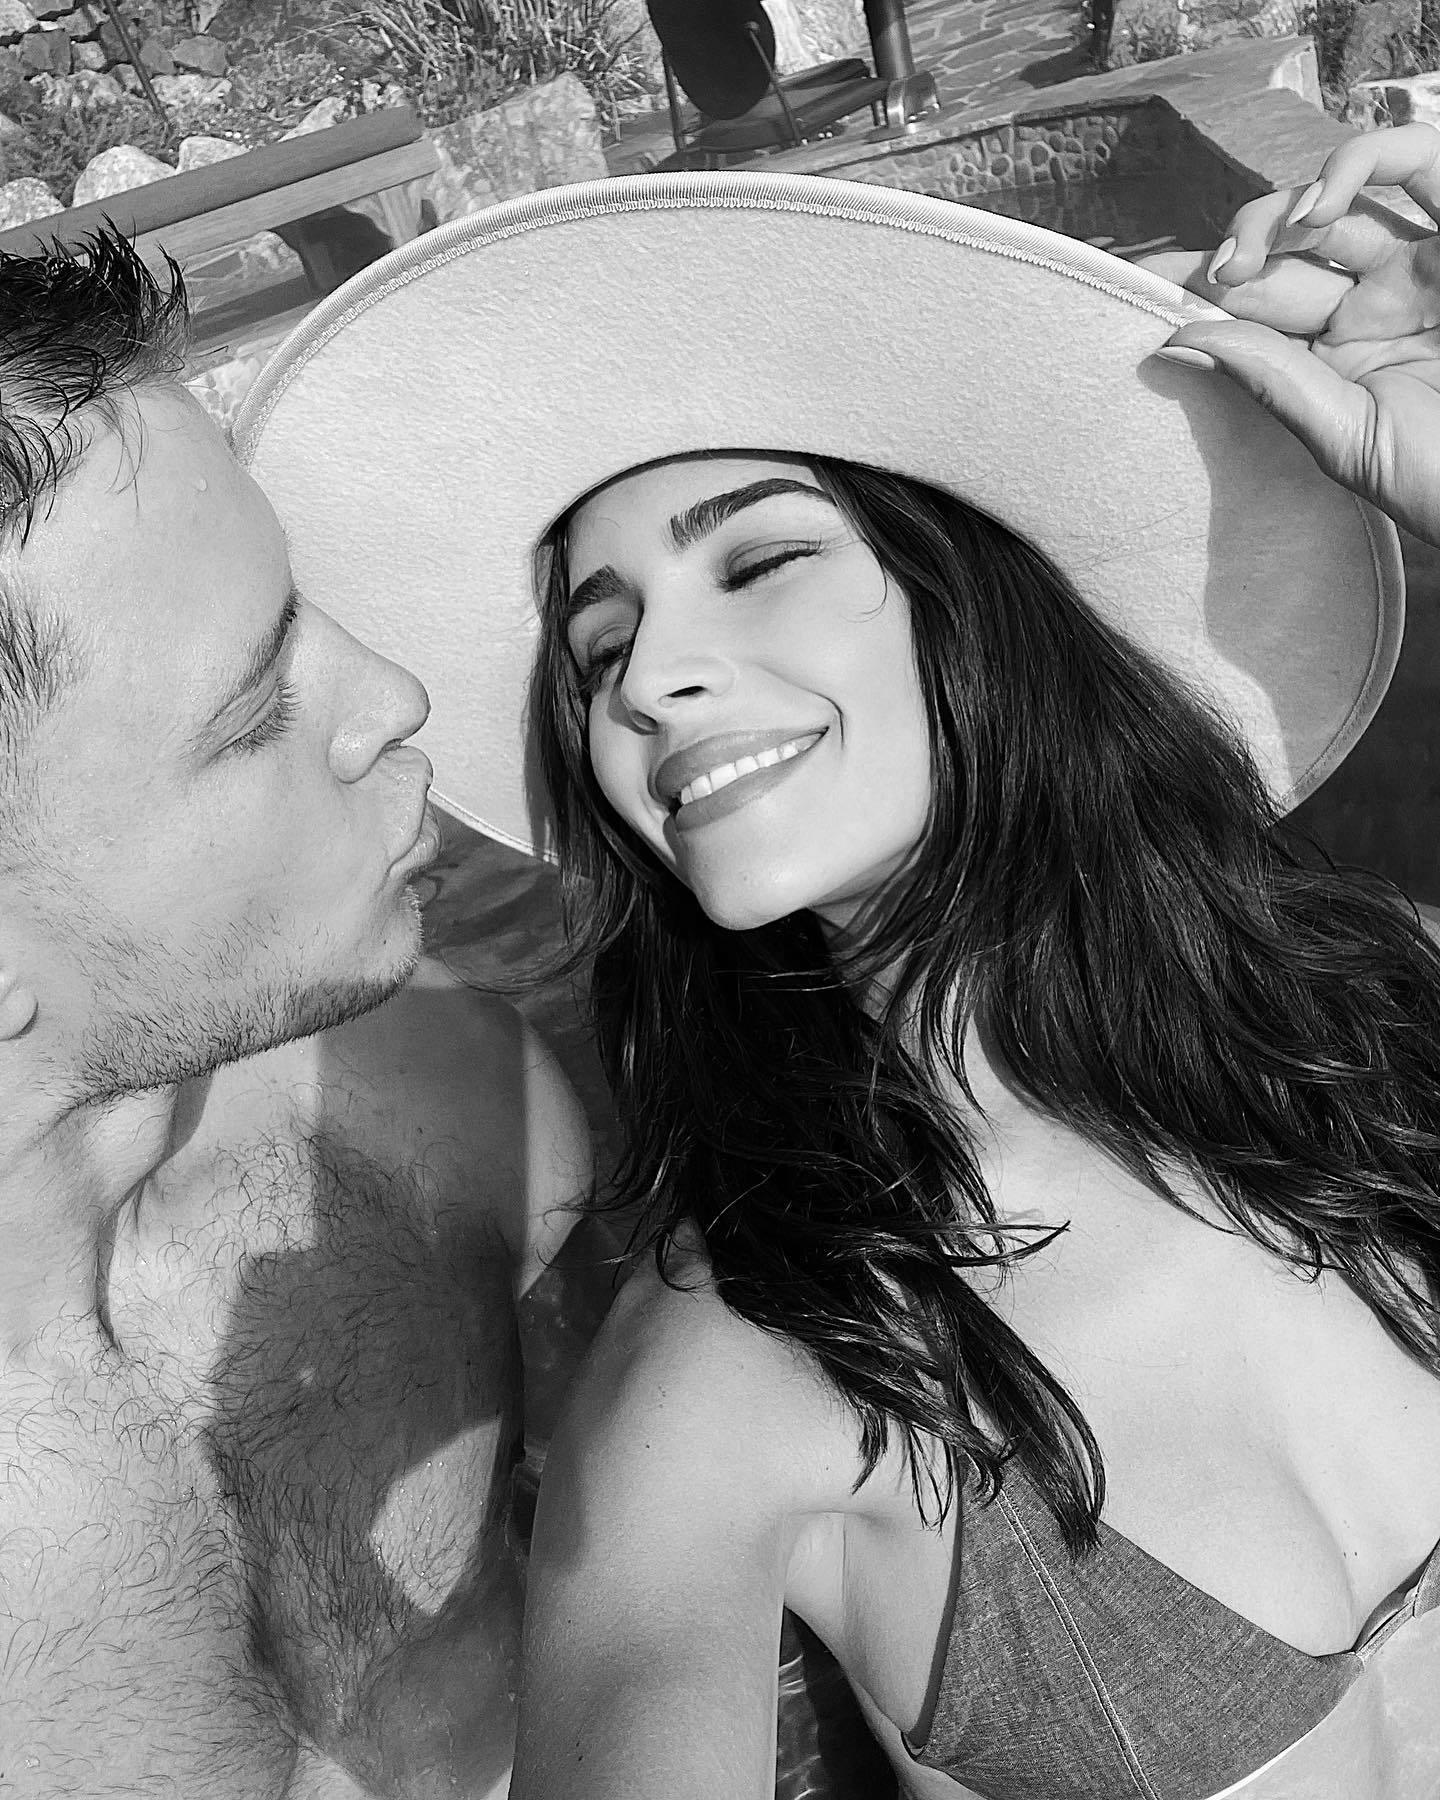 Tracing The Relationship Journey Of Model Olivia Culpo And NFL Player Christian McCaffrey